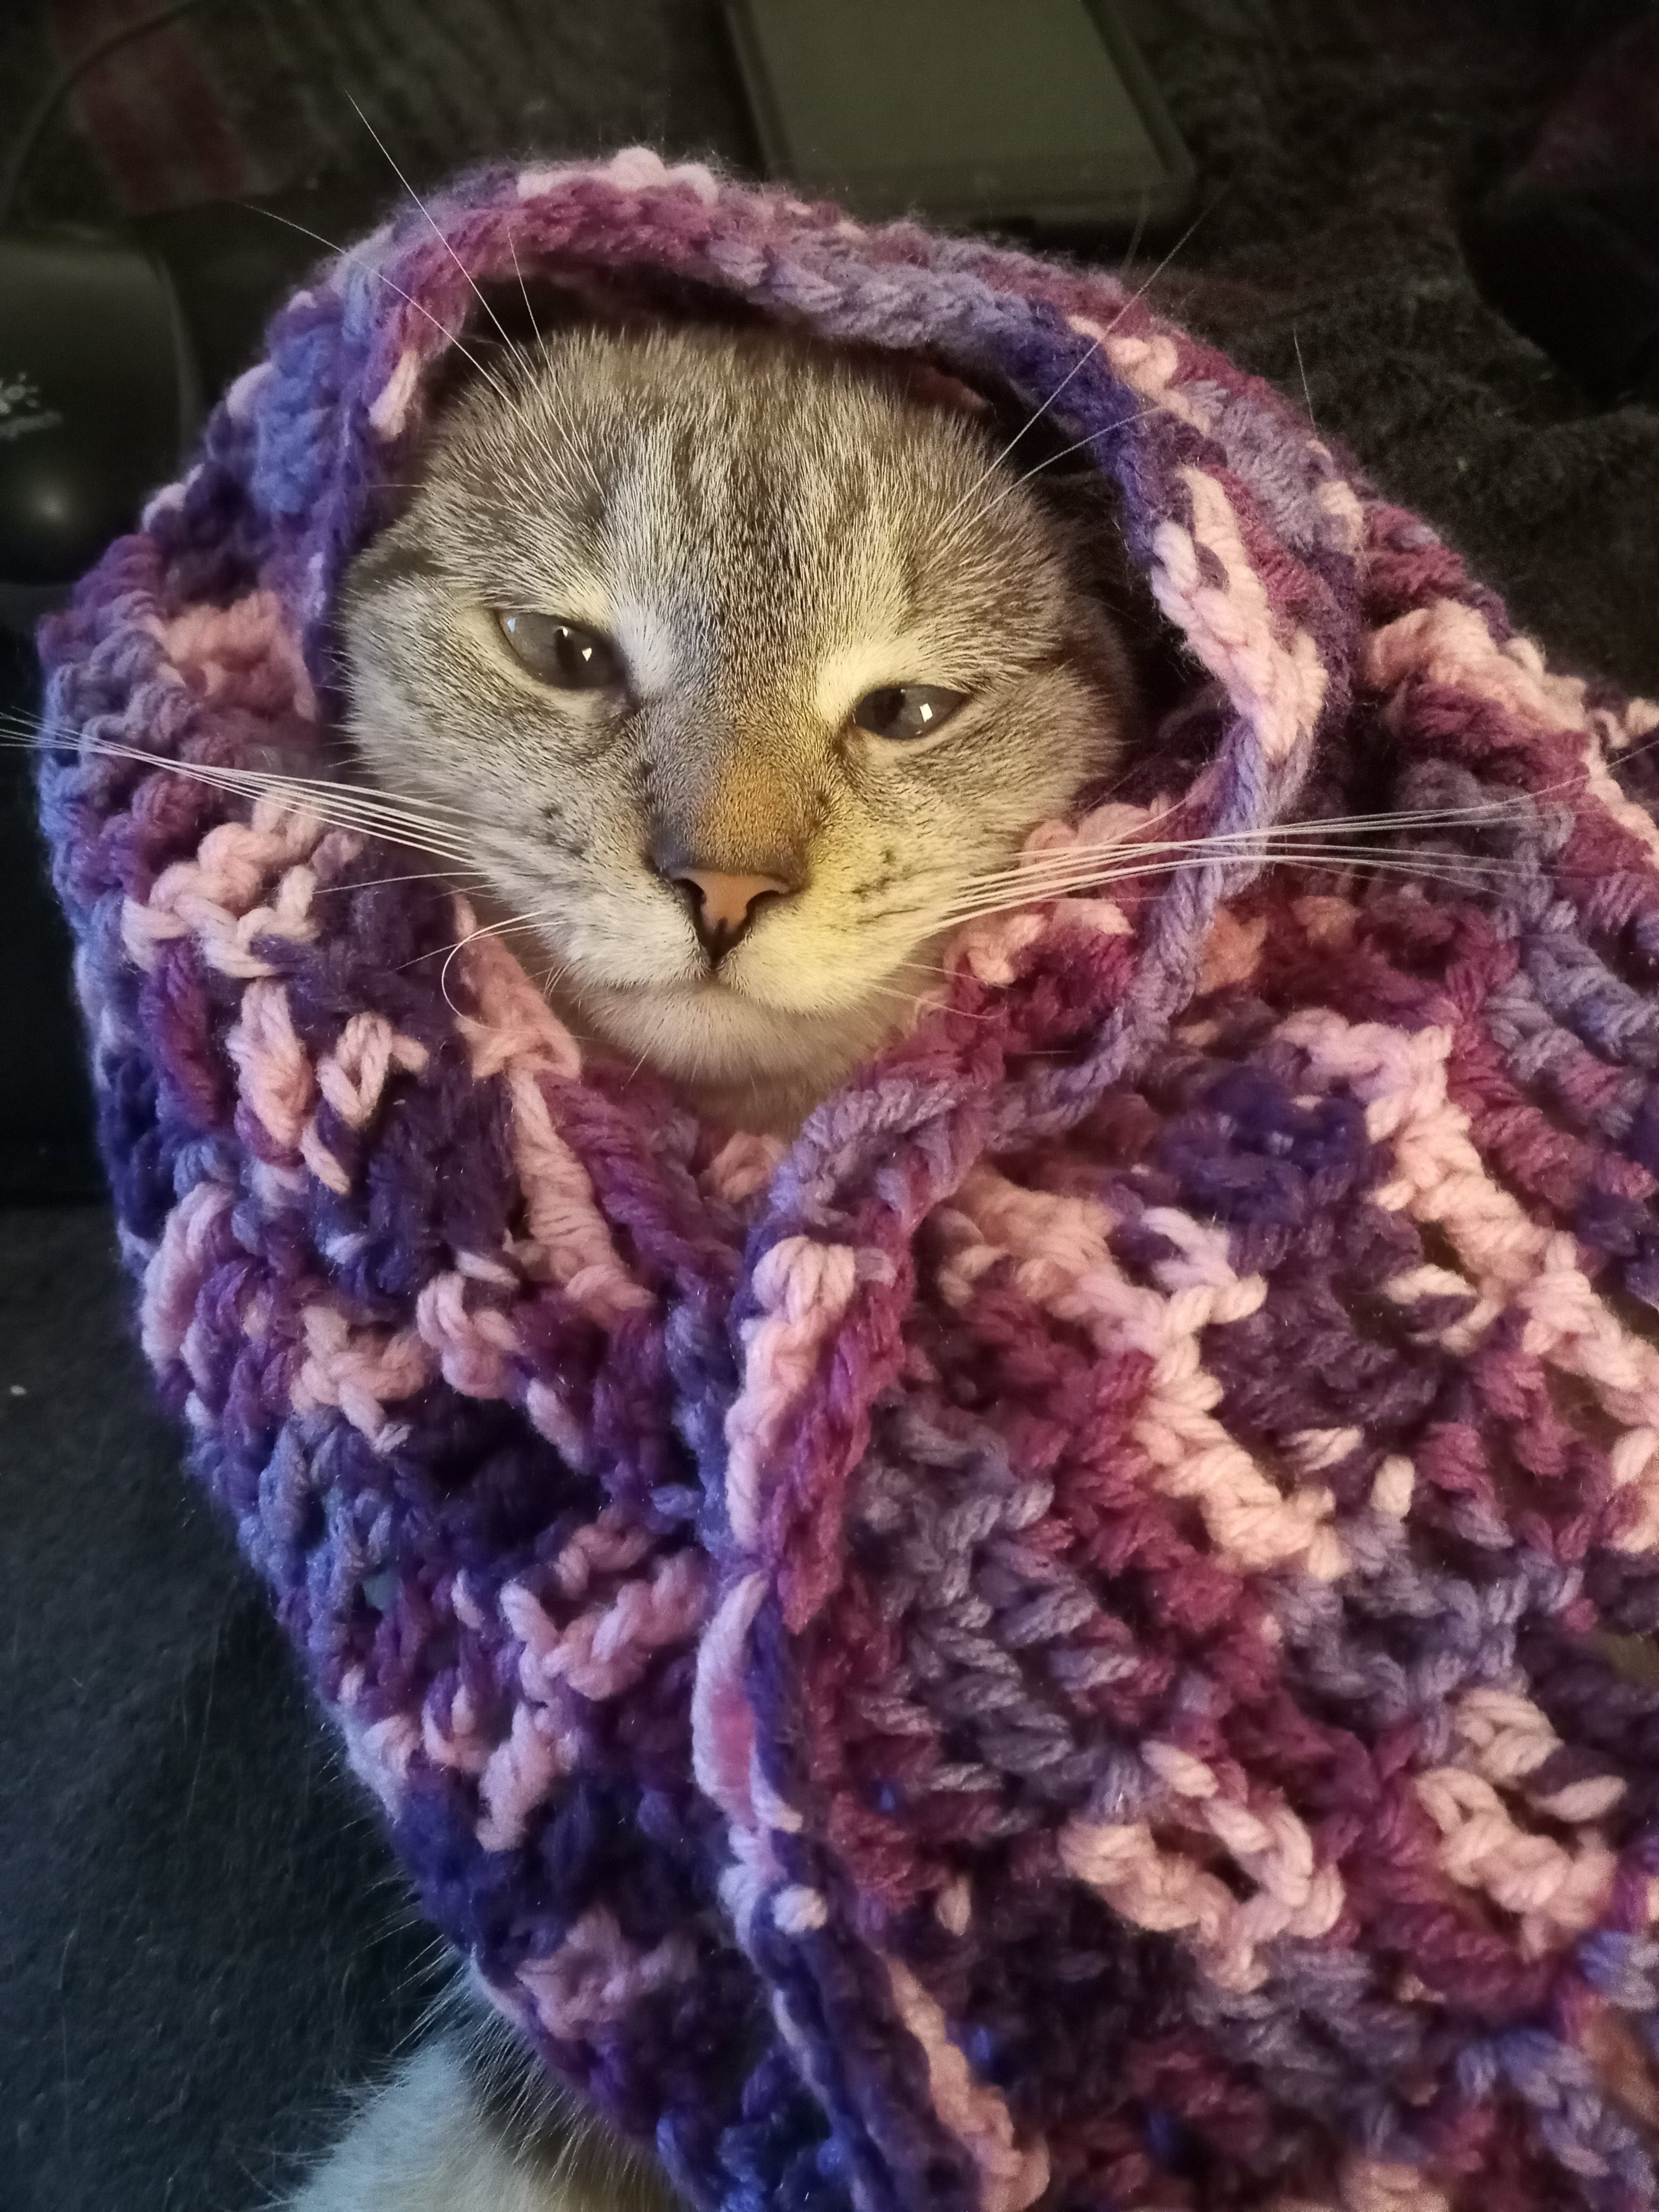 a gray tabby cat wearing a partially complete pink and purple shawl looking at the camera